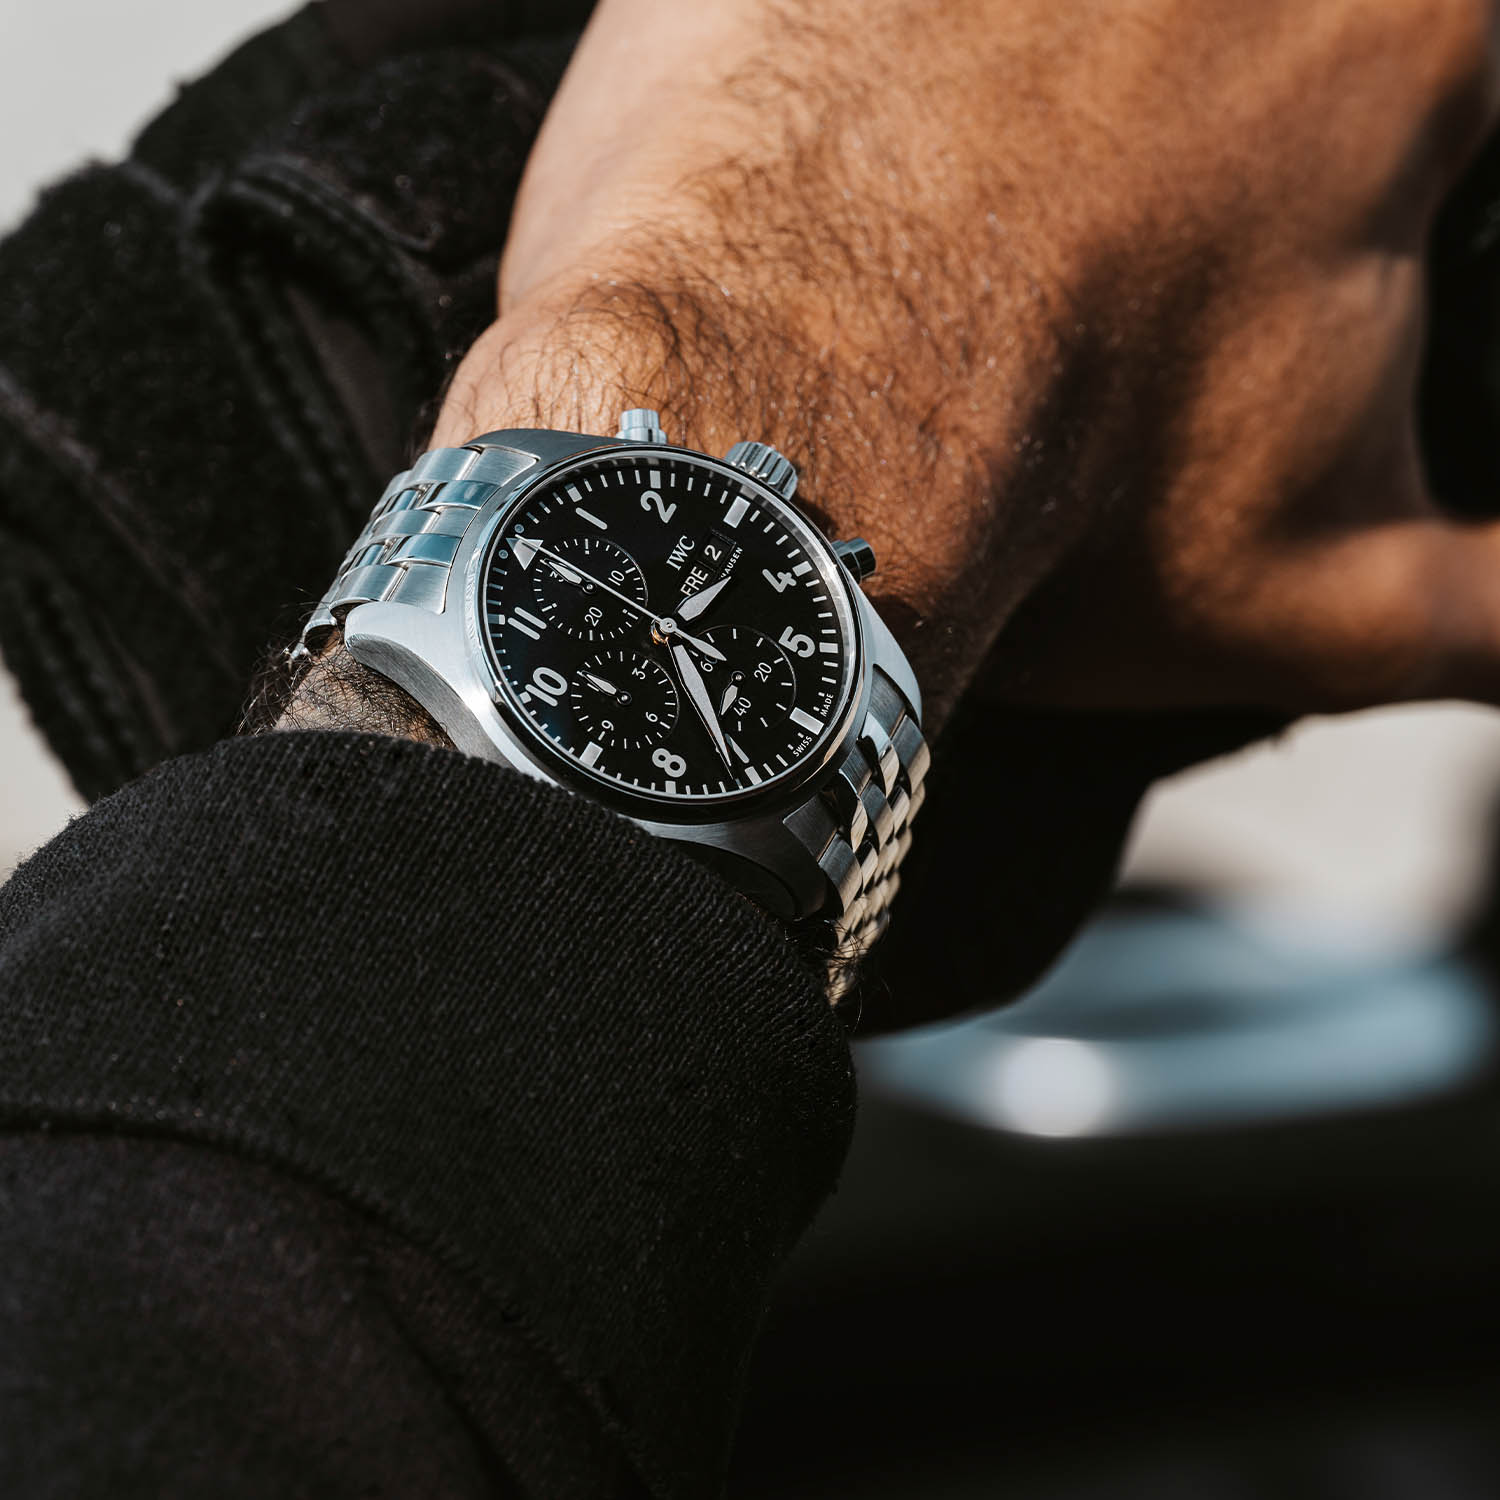 IWC Pilot's Watch Chronograph Edition C.03 x Collective IW388105